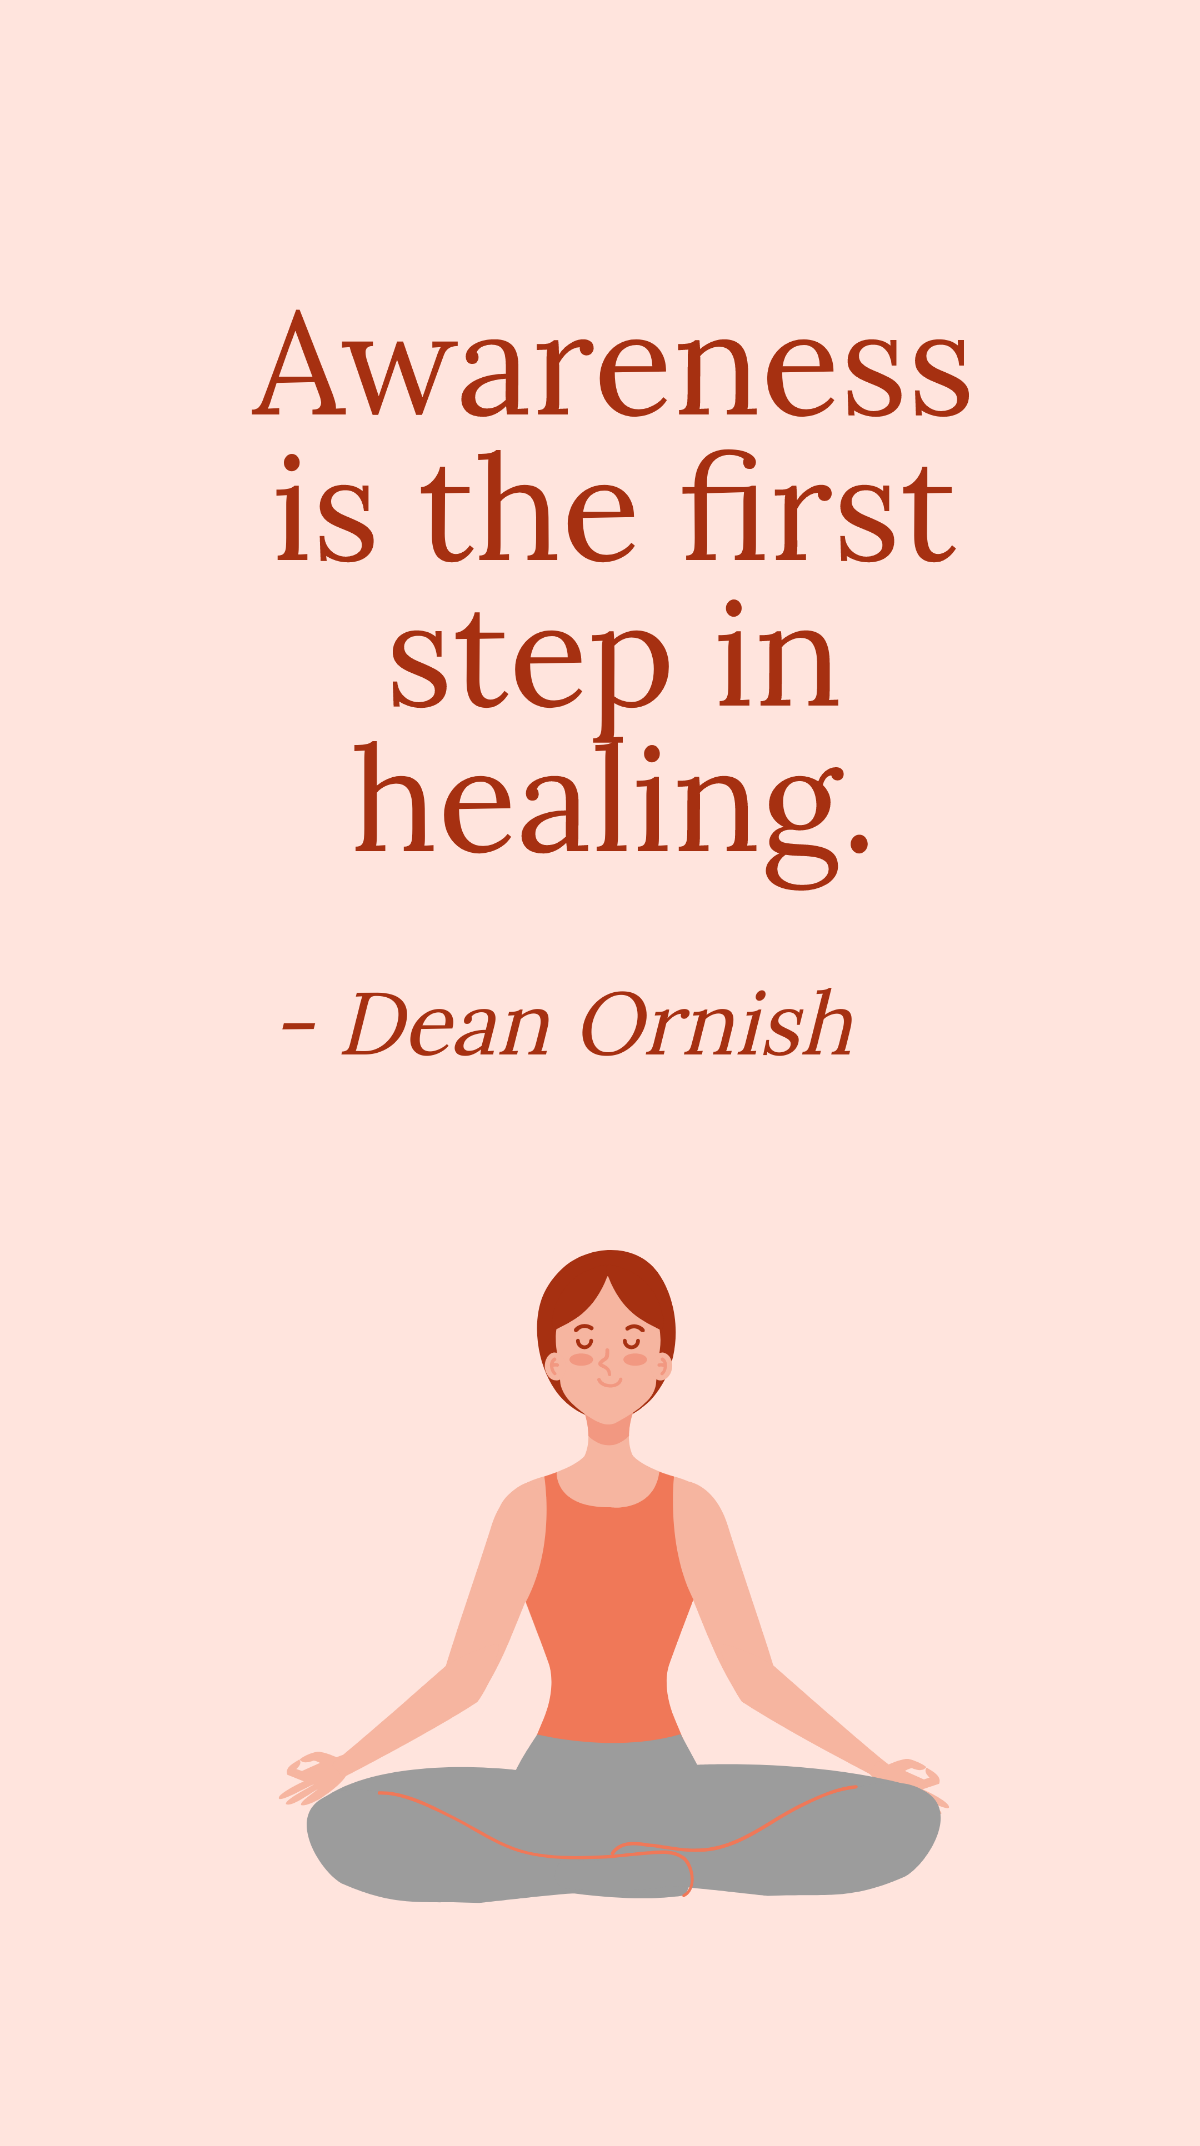 Free Dean Ornish - Awareness is the first step in healing. Template